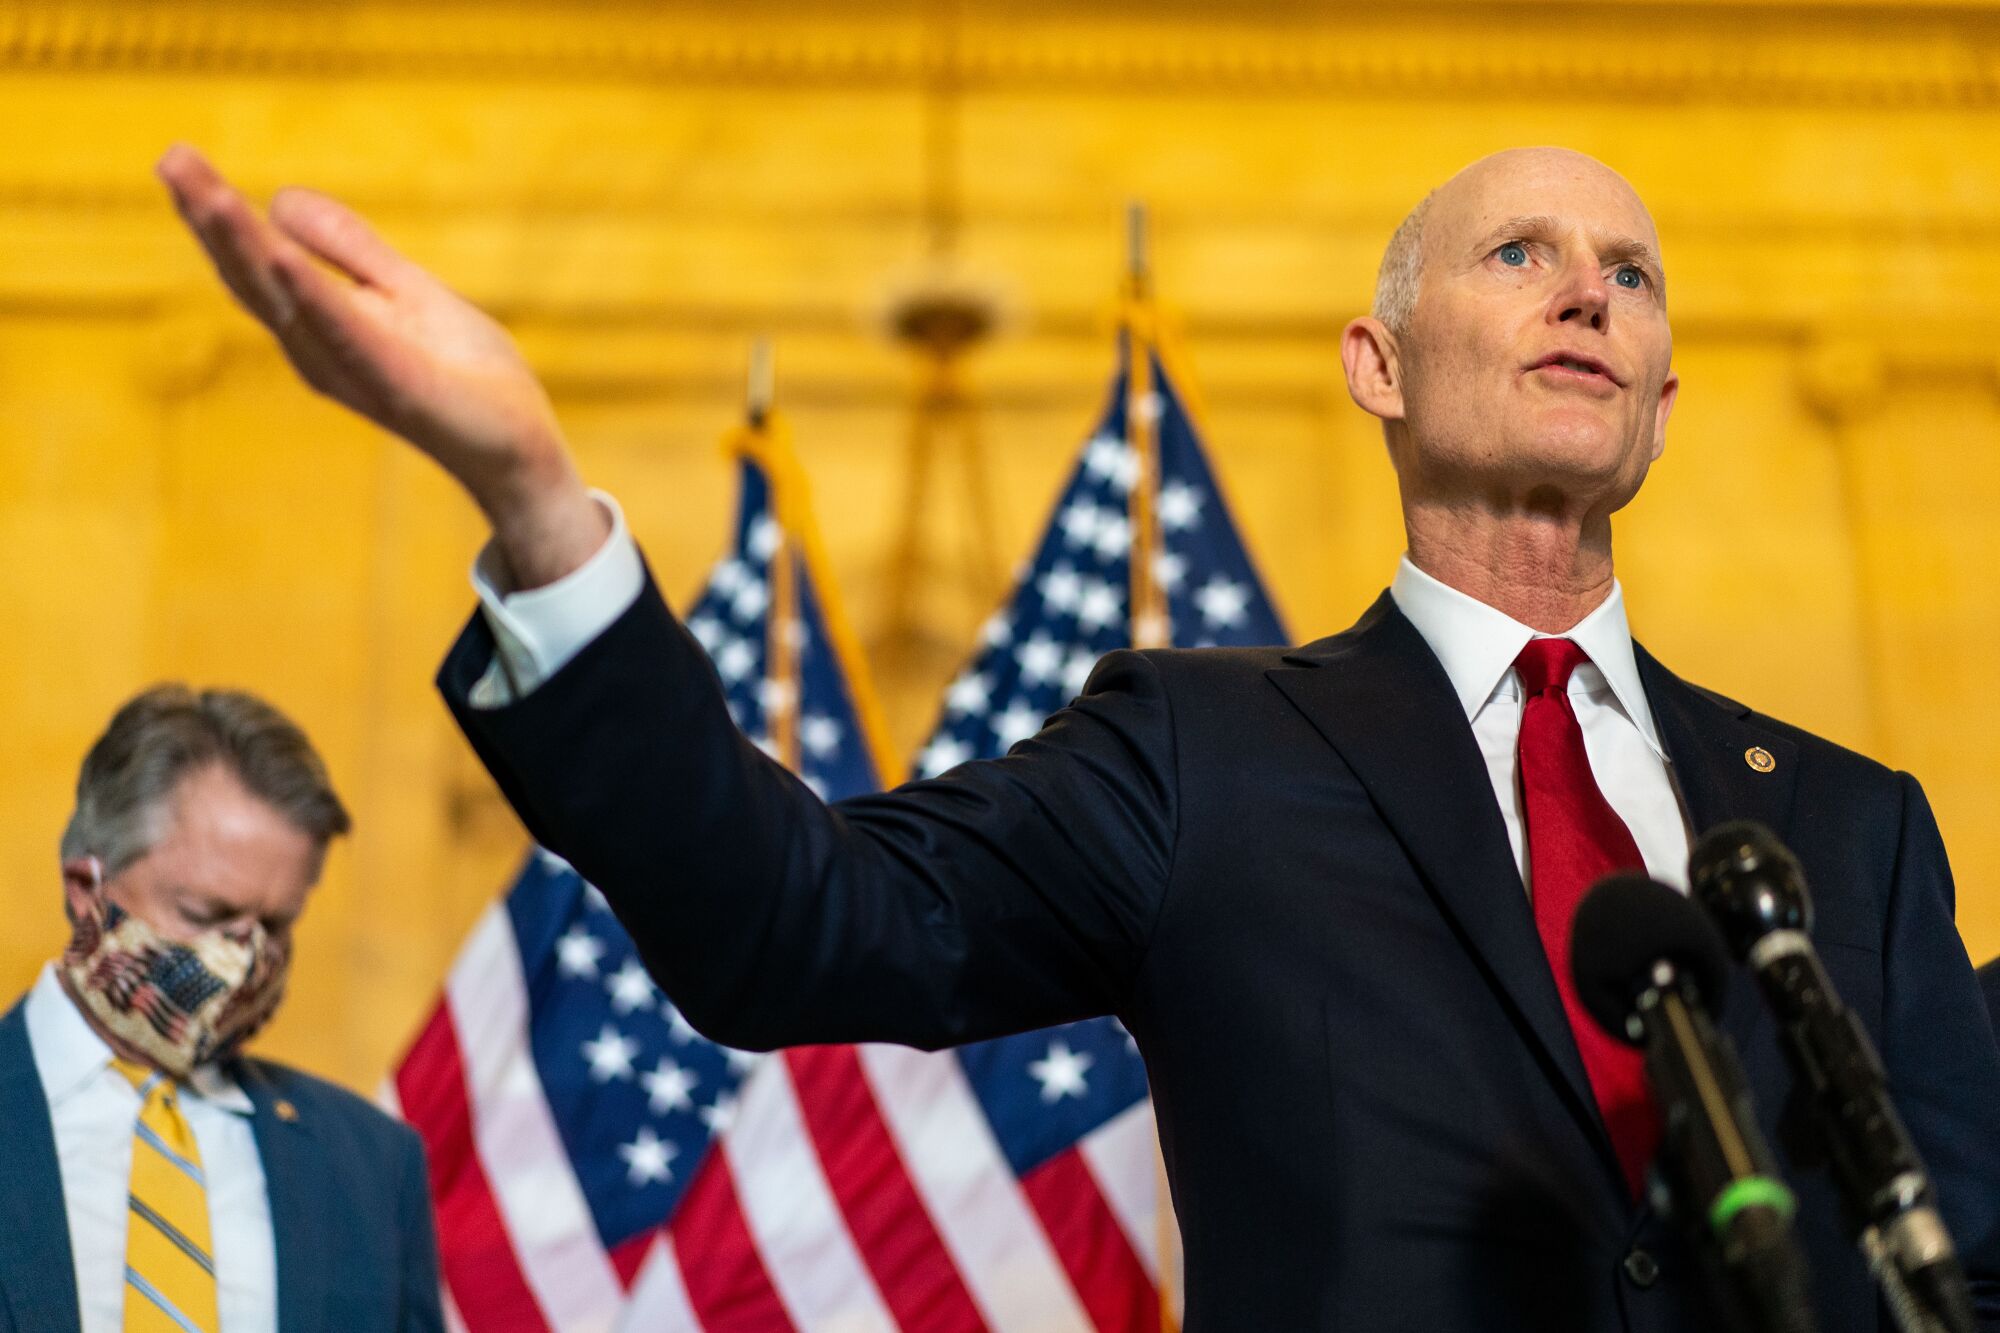 Rick Scott in a suit and red tie speaking into microphones while gesturing with his right arm raised.